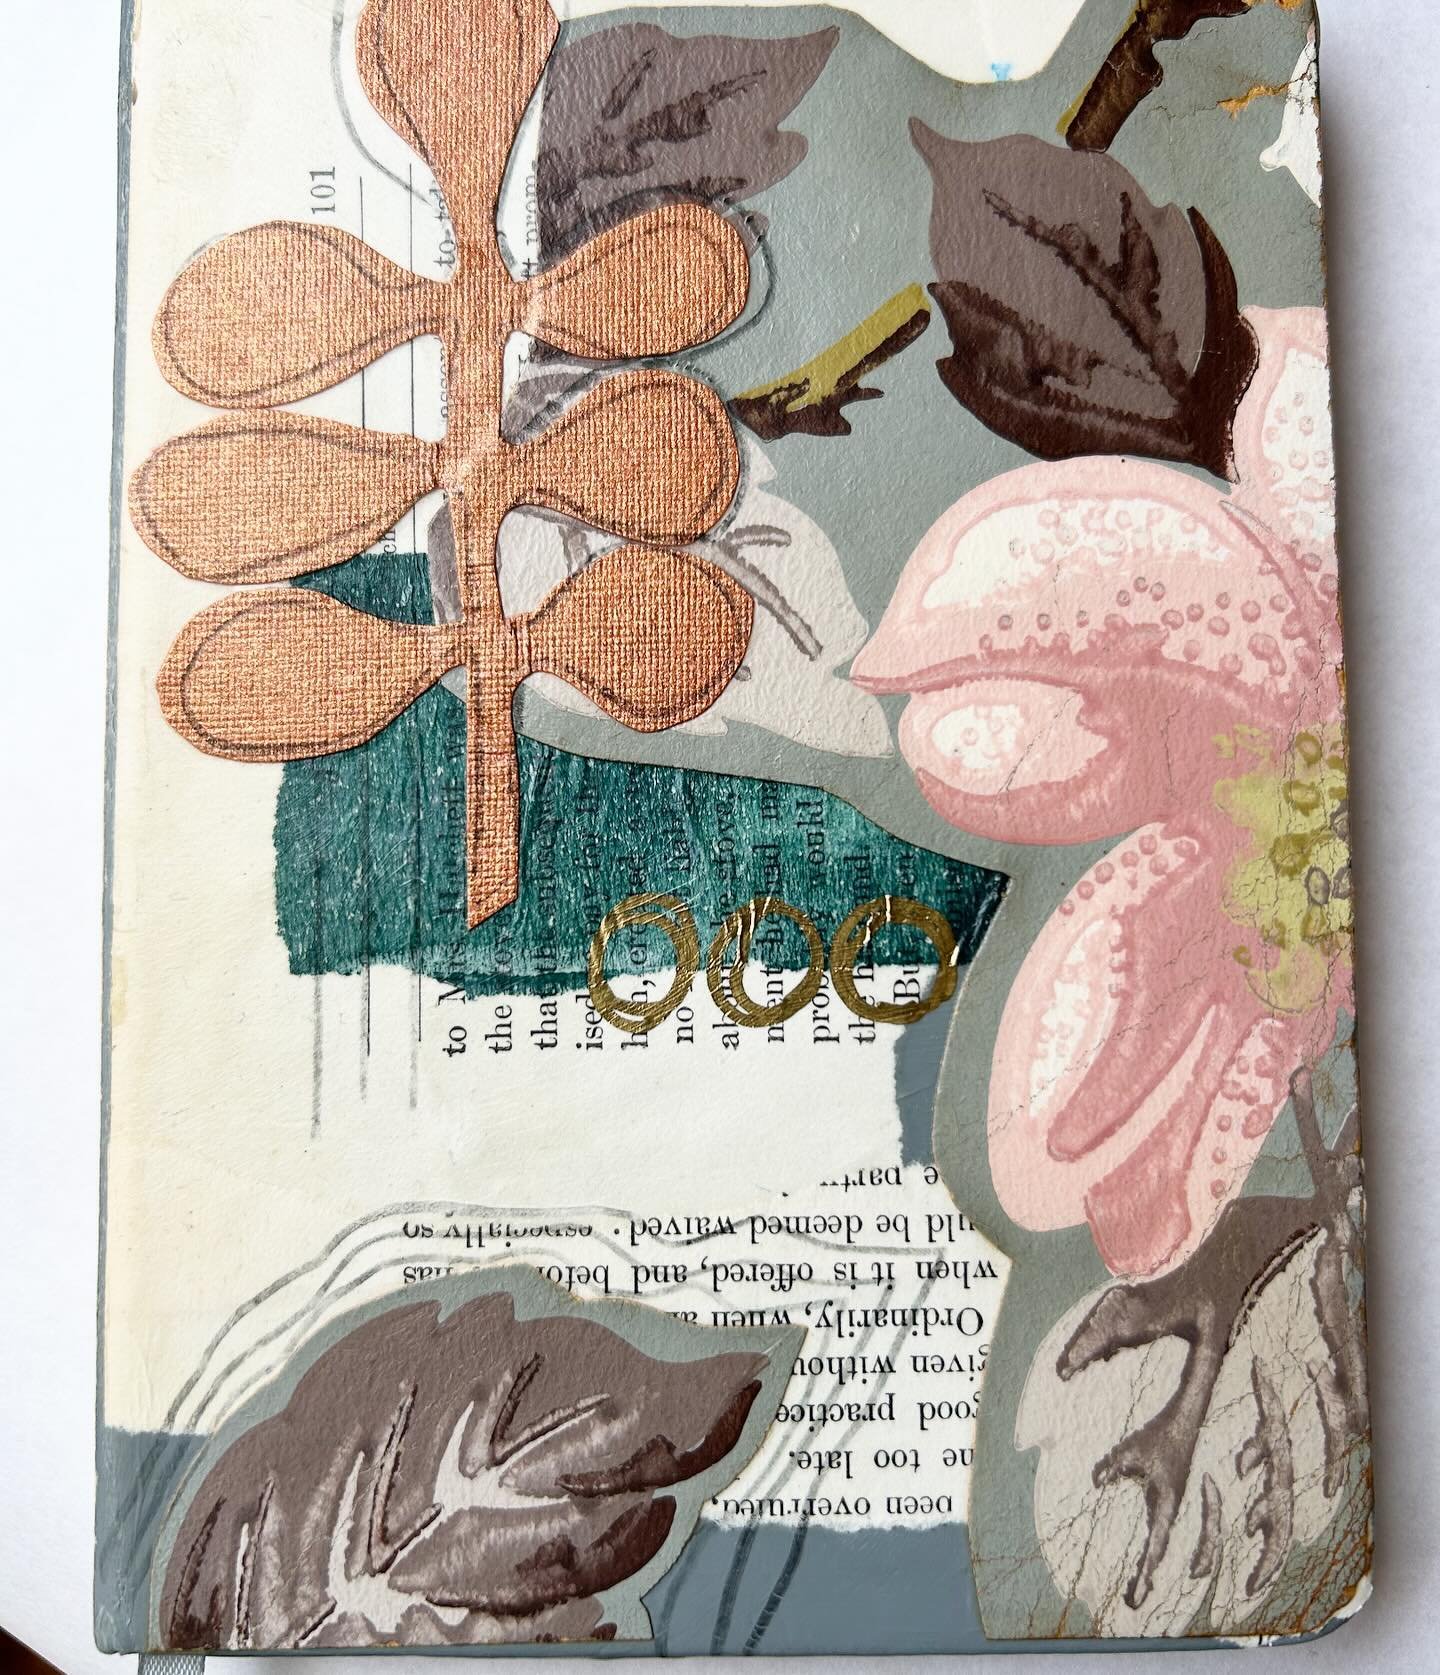 Got a stack of journals with lined paper from @creativereuseomahainc and decided to upcycle them by adding collage on the cover, pockets and embellishments inside. Here&rsquo;s the first one. I have 4 more that will get similar treatments. 

#upcycle